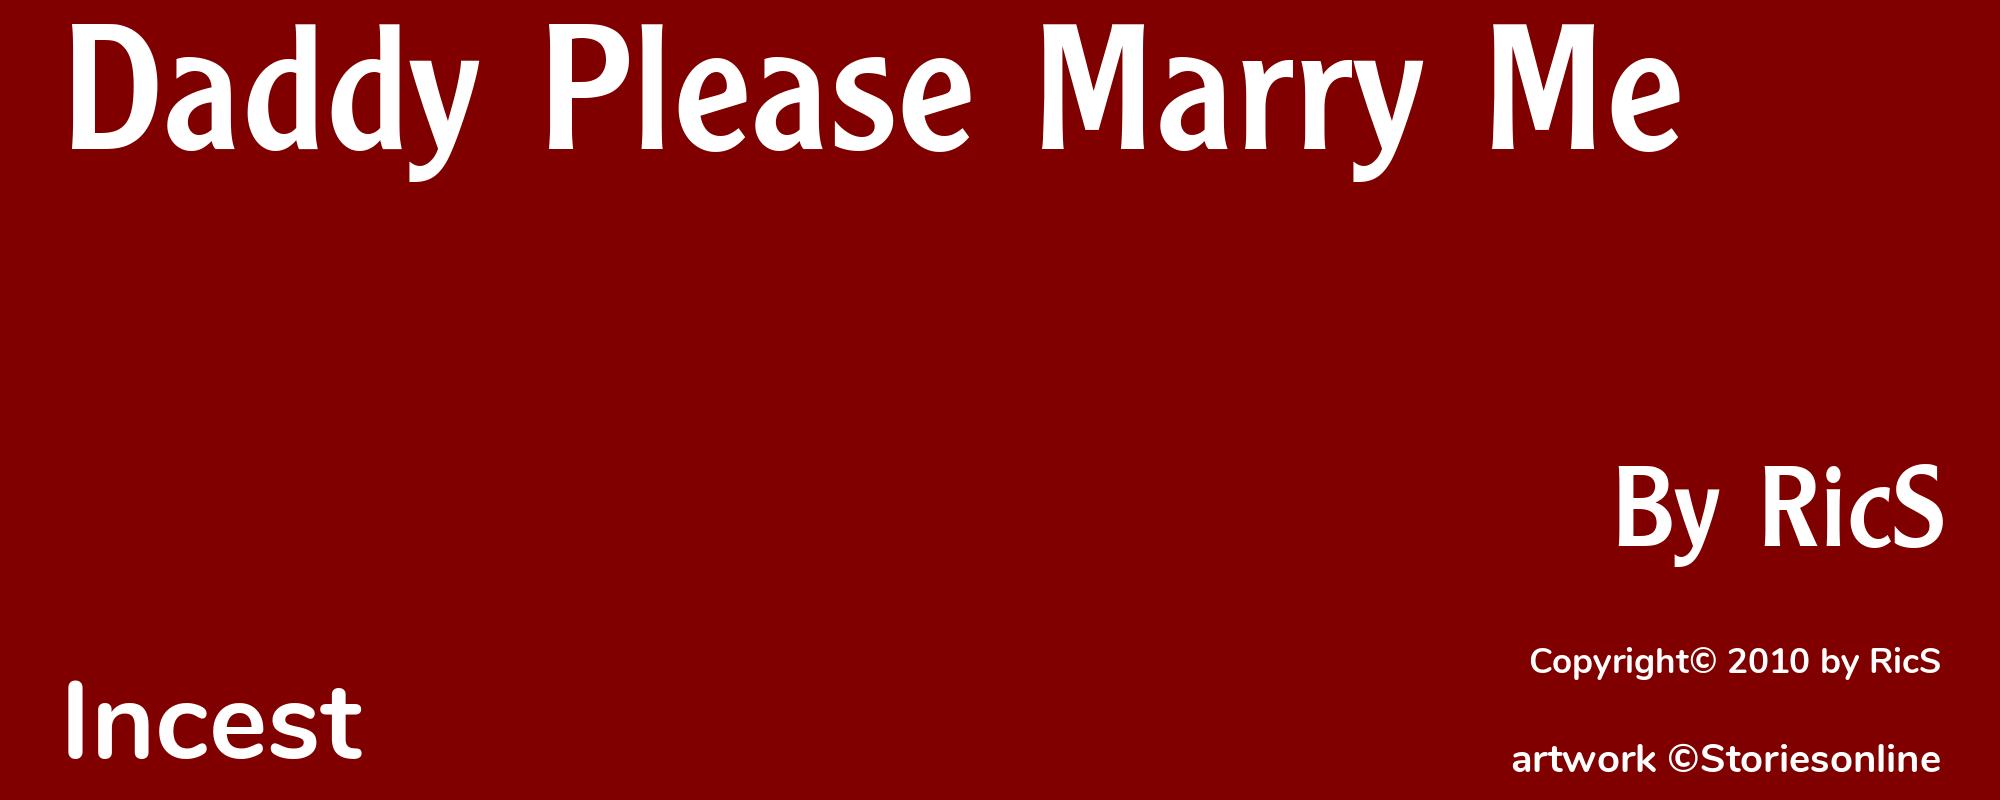 Daddy Please Marry Me - Cover